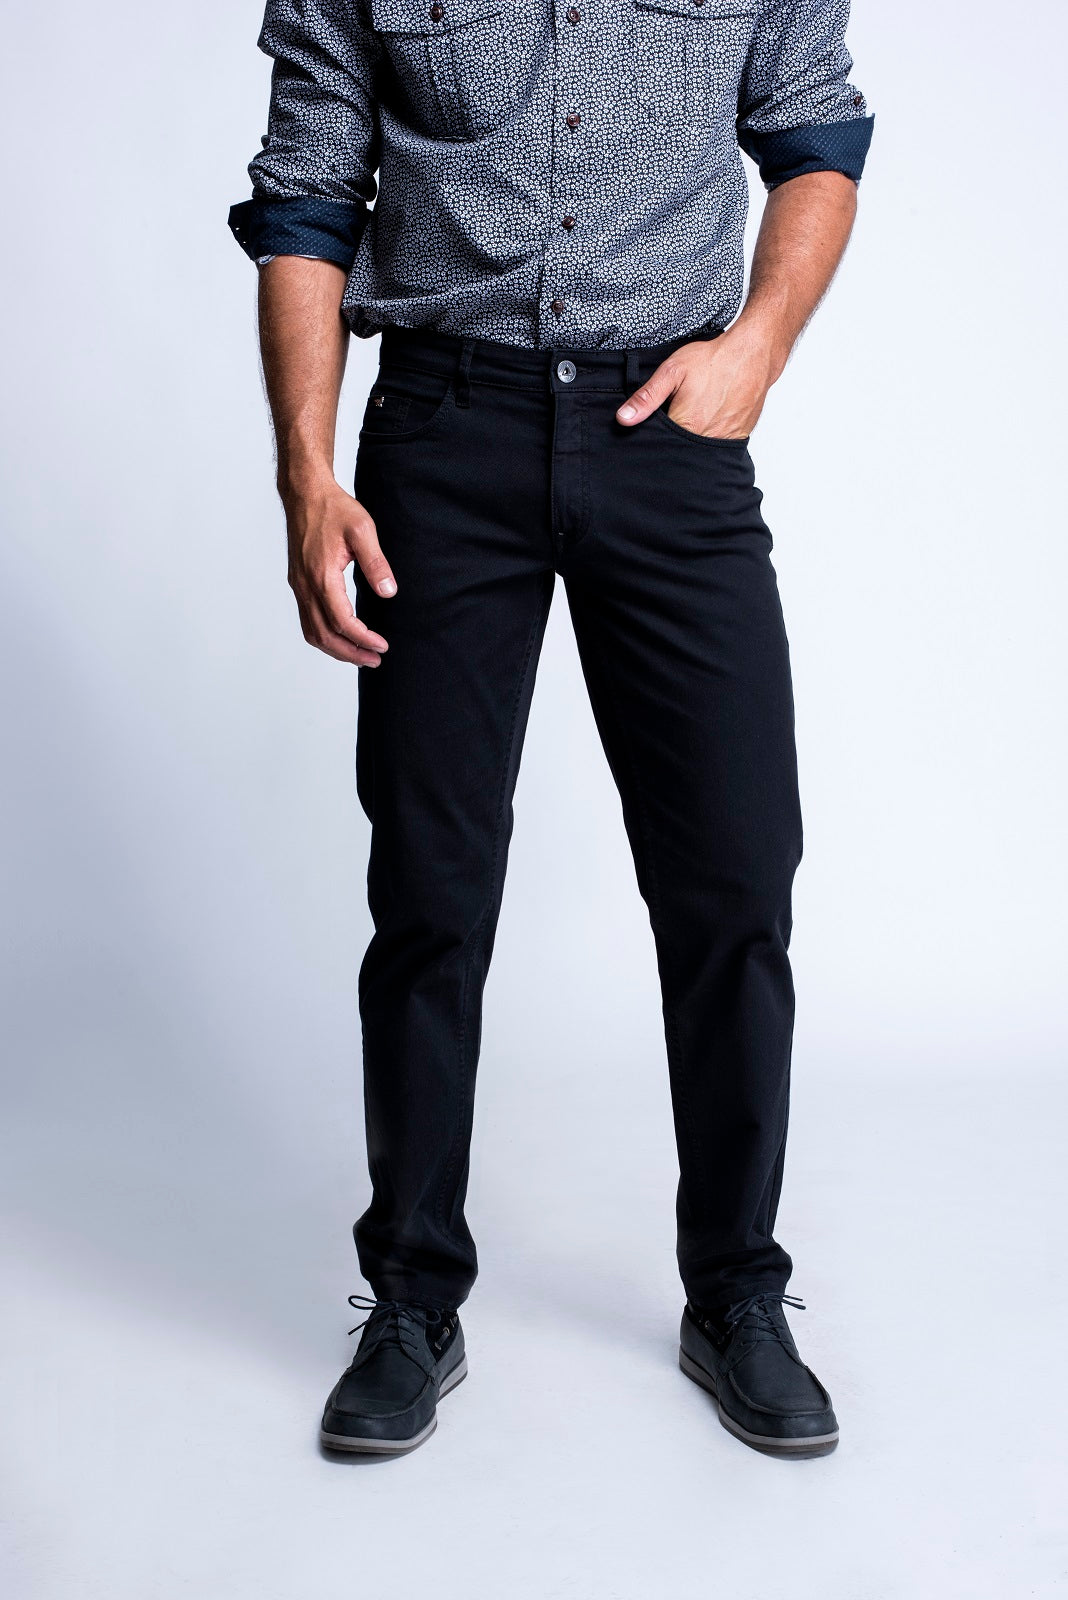 Andrew Smith Celana Panjang Slim Fit Pria A0104X01A